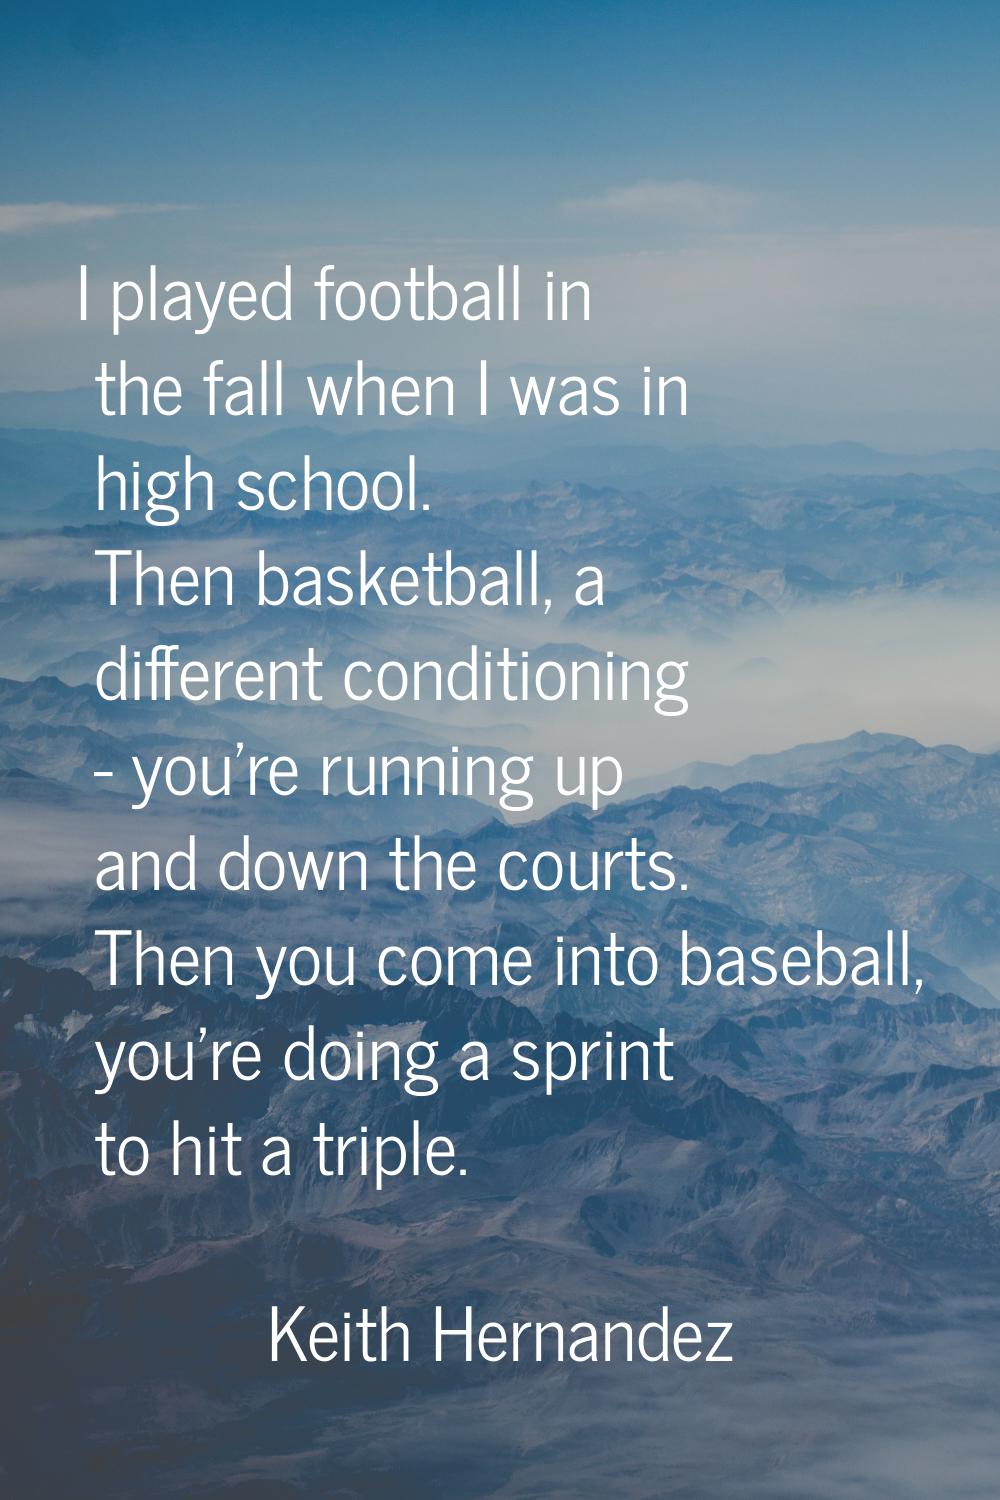 I played football in the fall when I was in high school. Then basketball, a different conditioning 